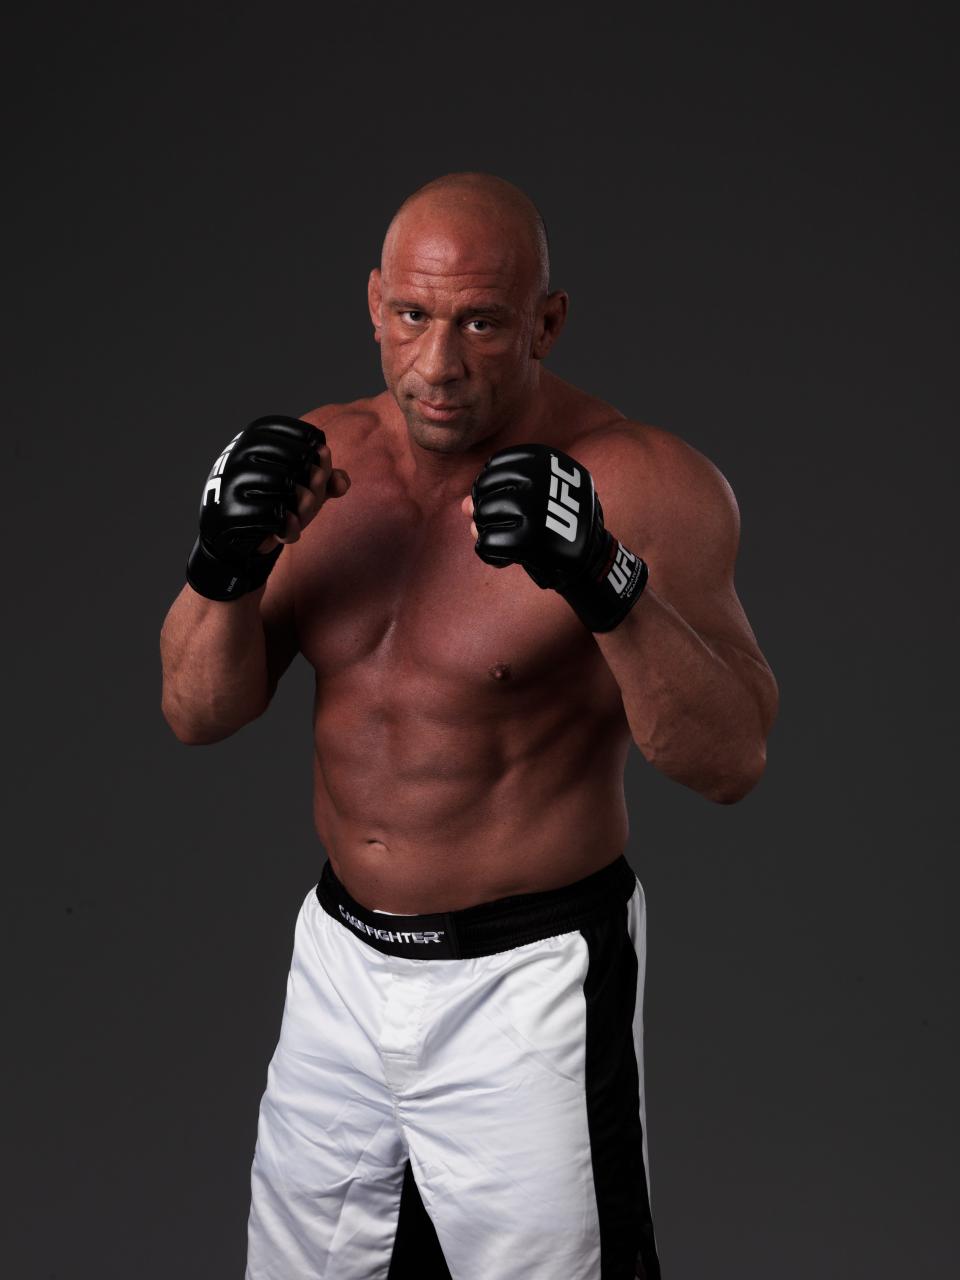 UFC Hall of Famer Mark "The Hammer" Coleman in a promotional image from his prize fighting career